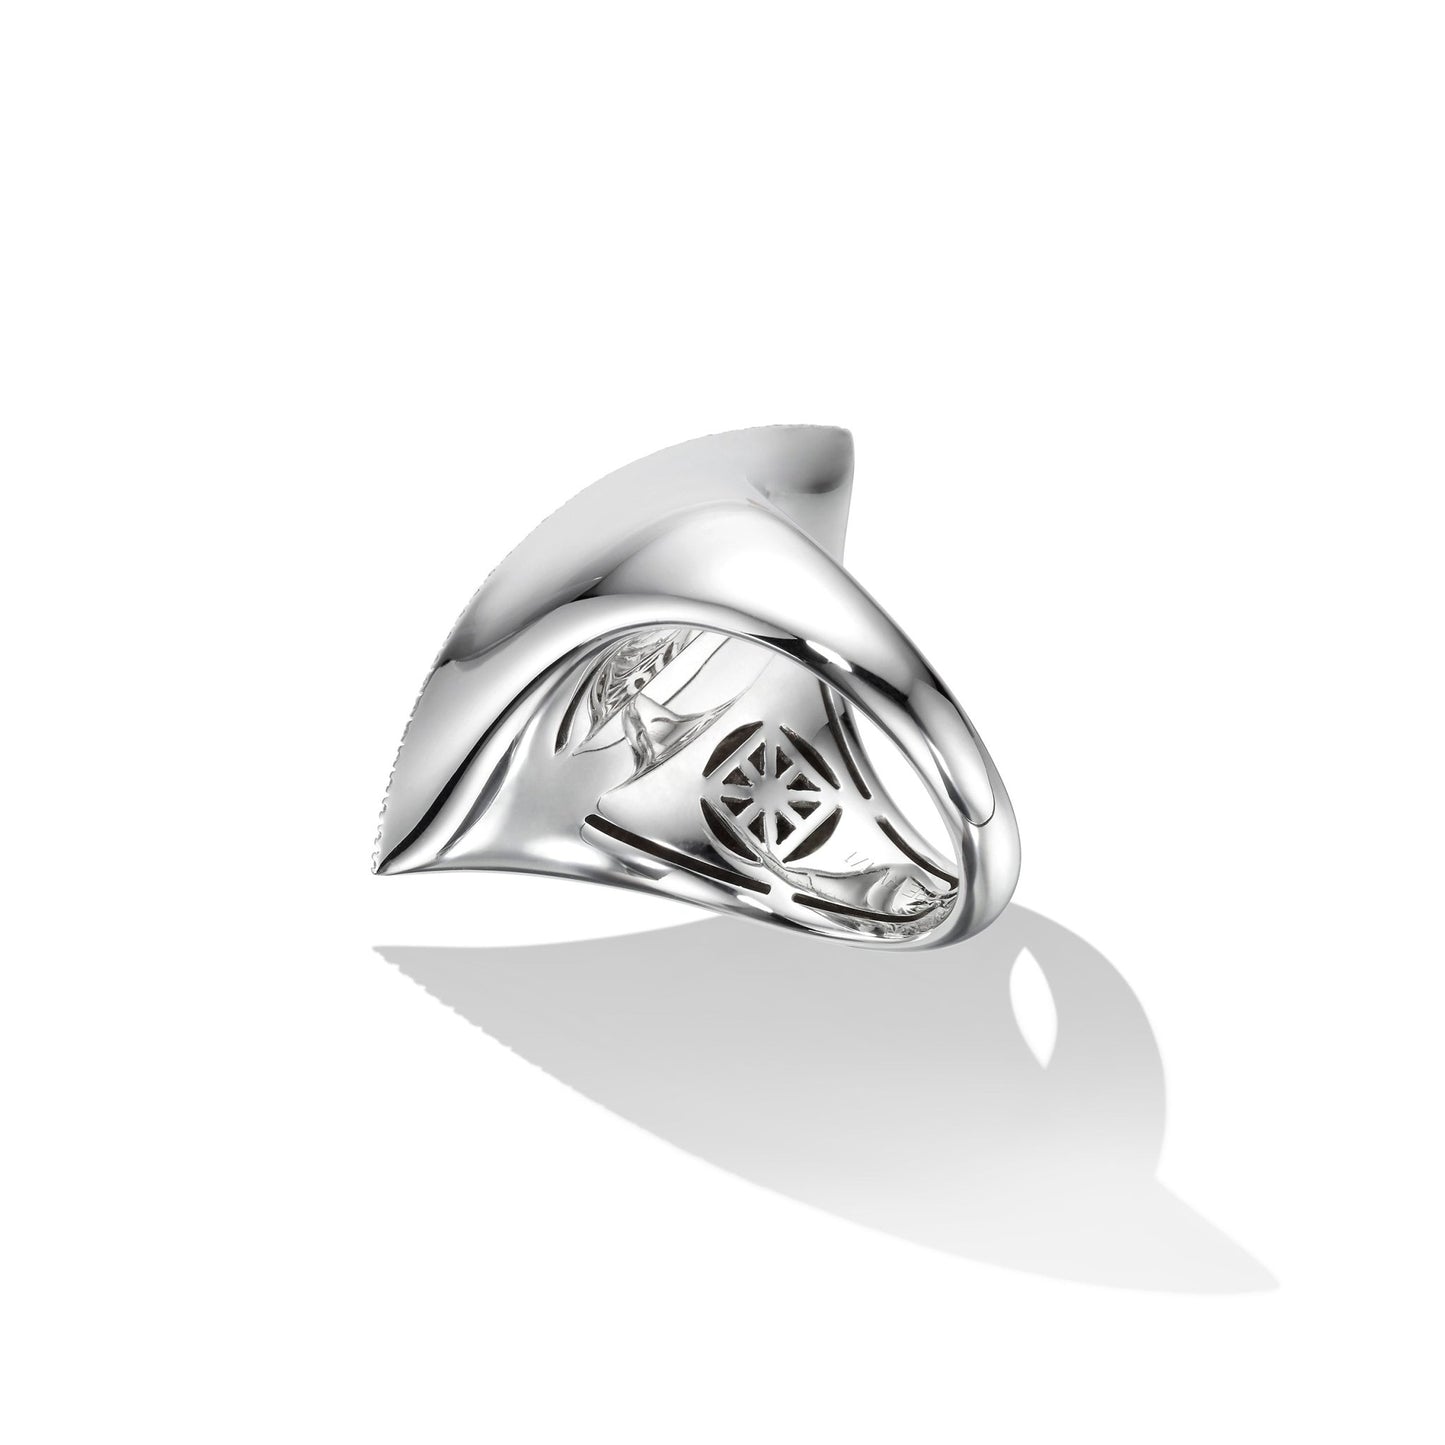 White Gold Reflections Cocktail Ring with White Diamonds - Cadar